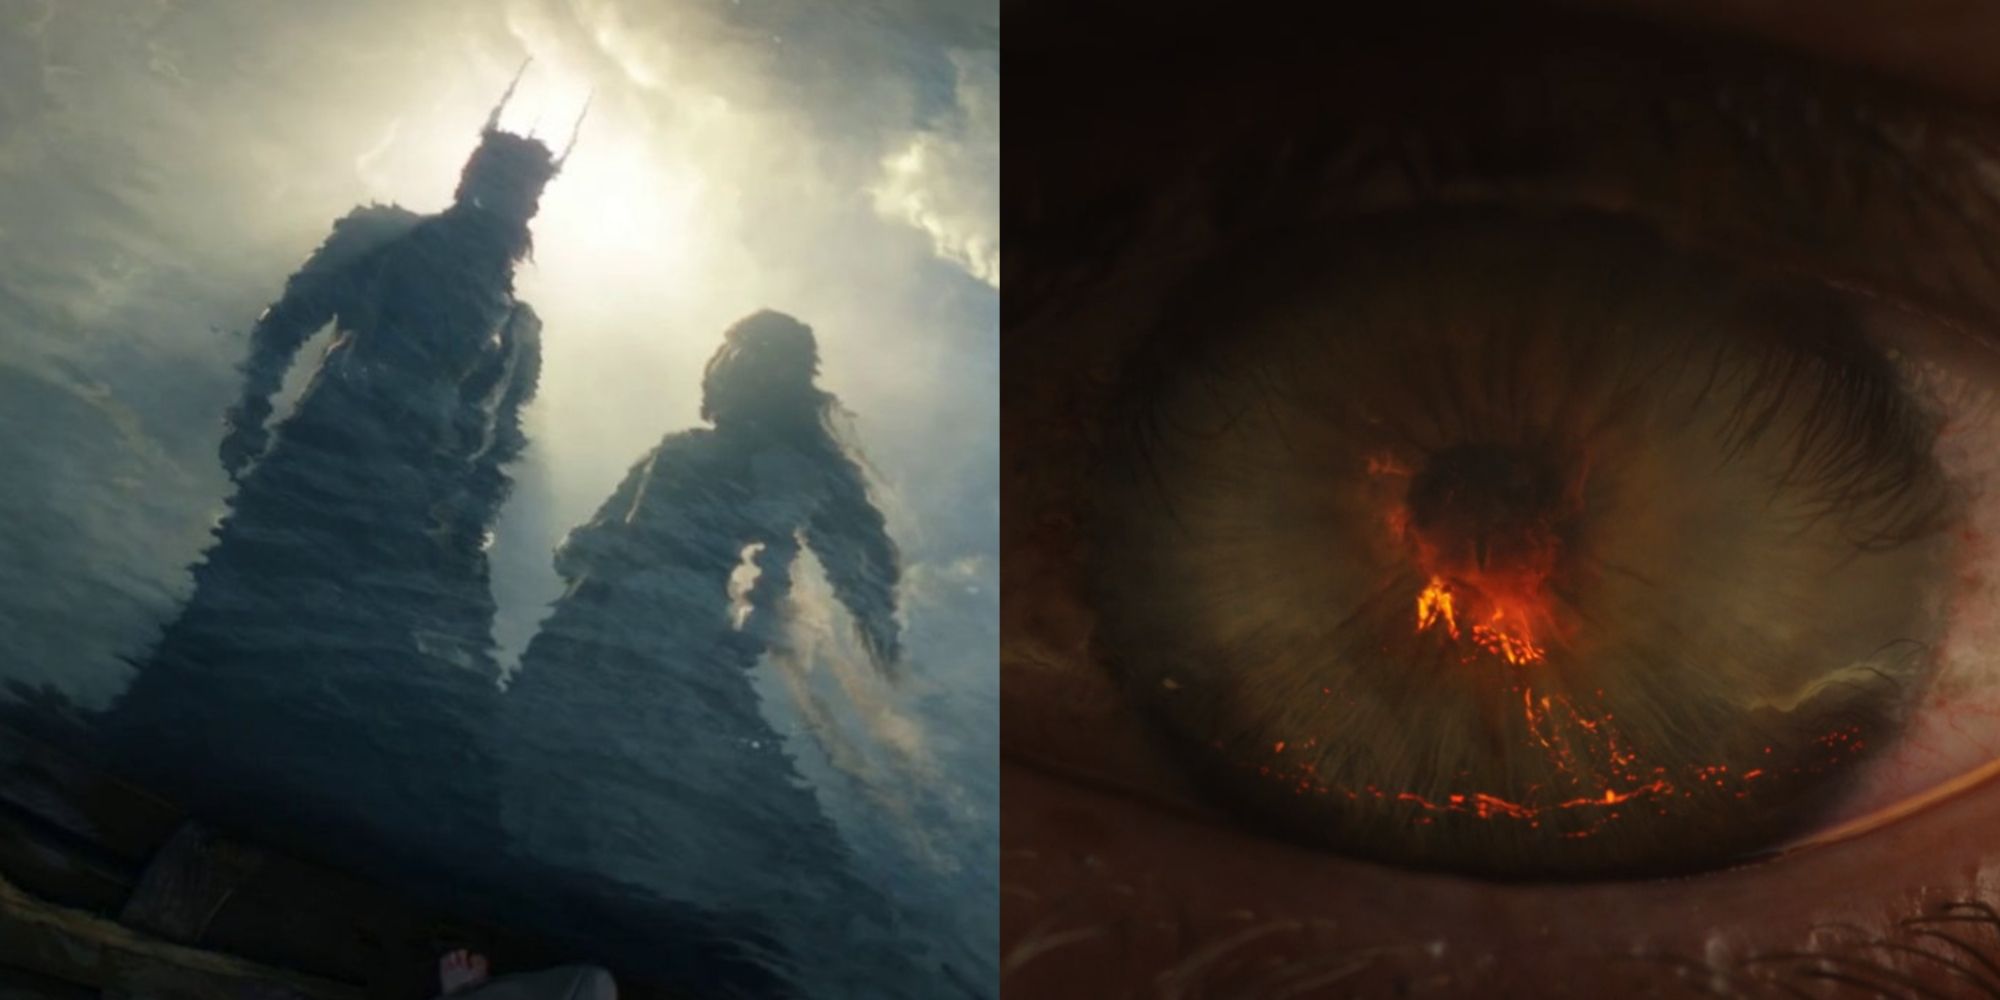 The Rings of Power' Creators Reveal How Sauron Hid in Plain Sight